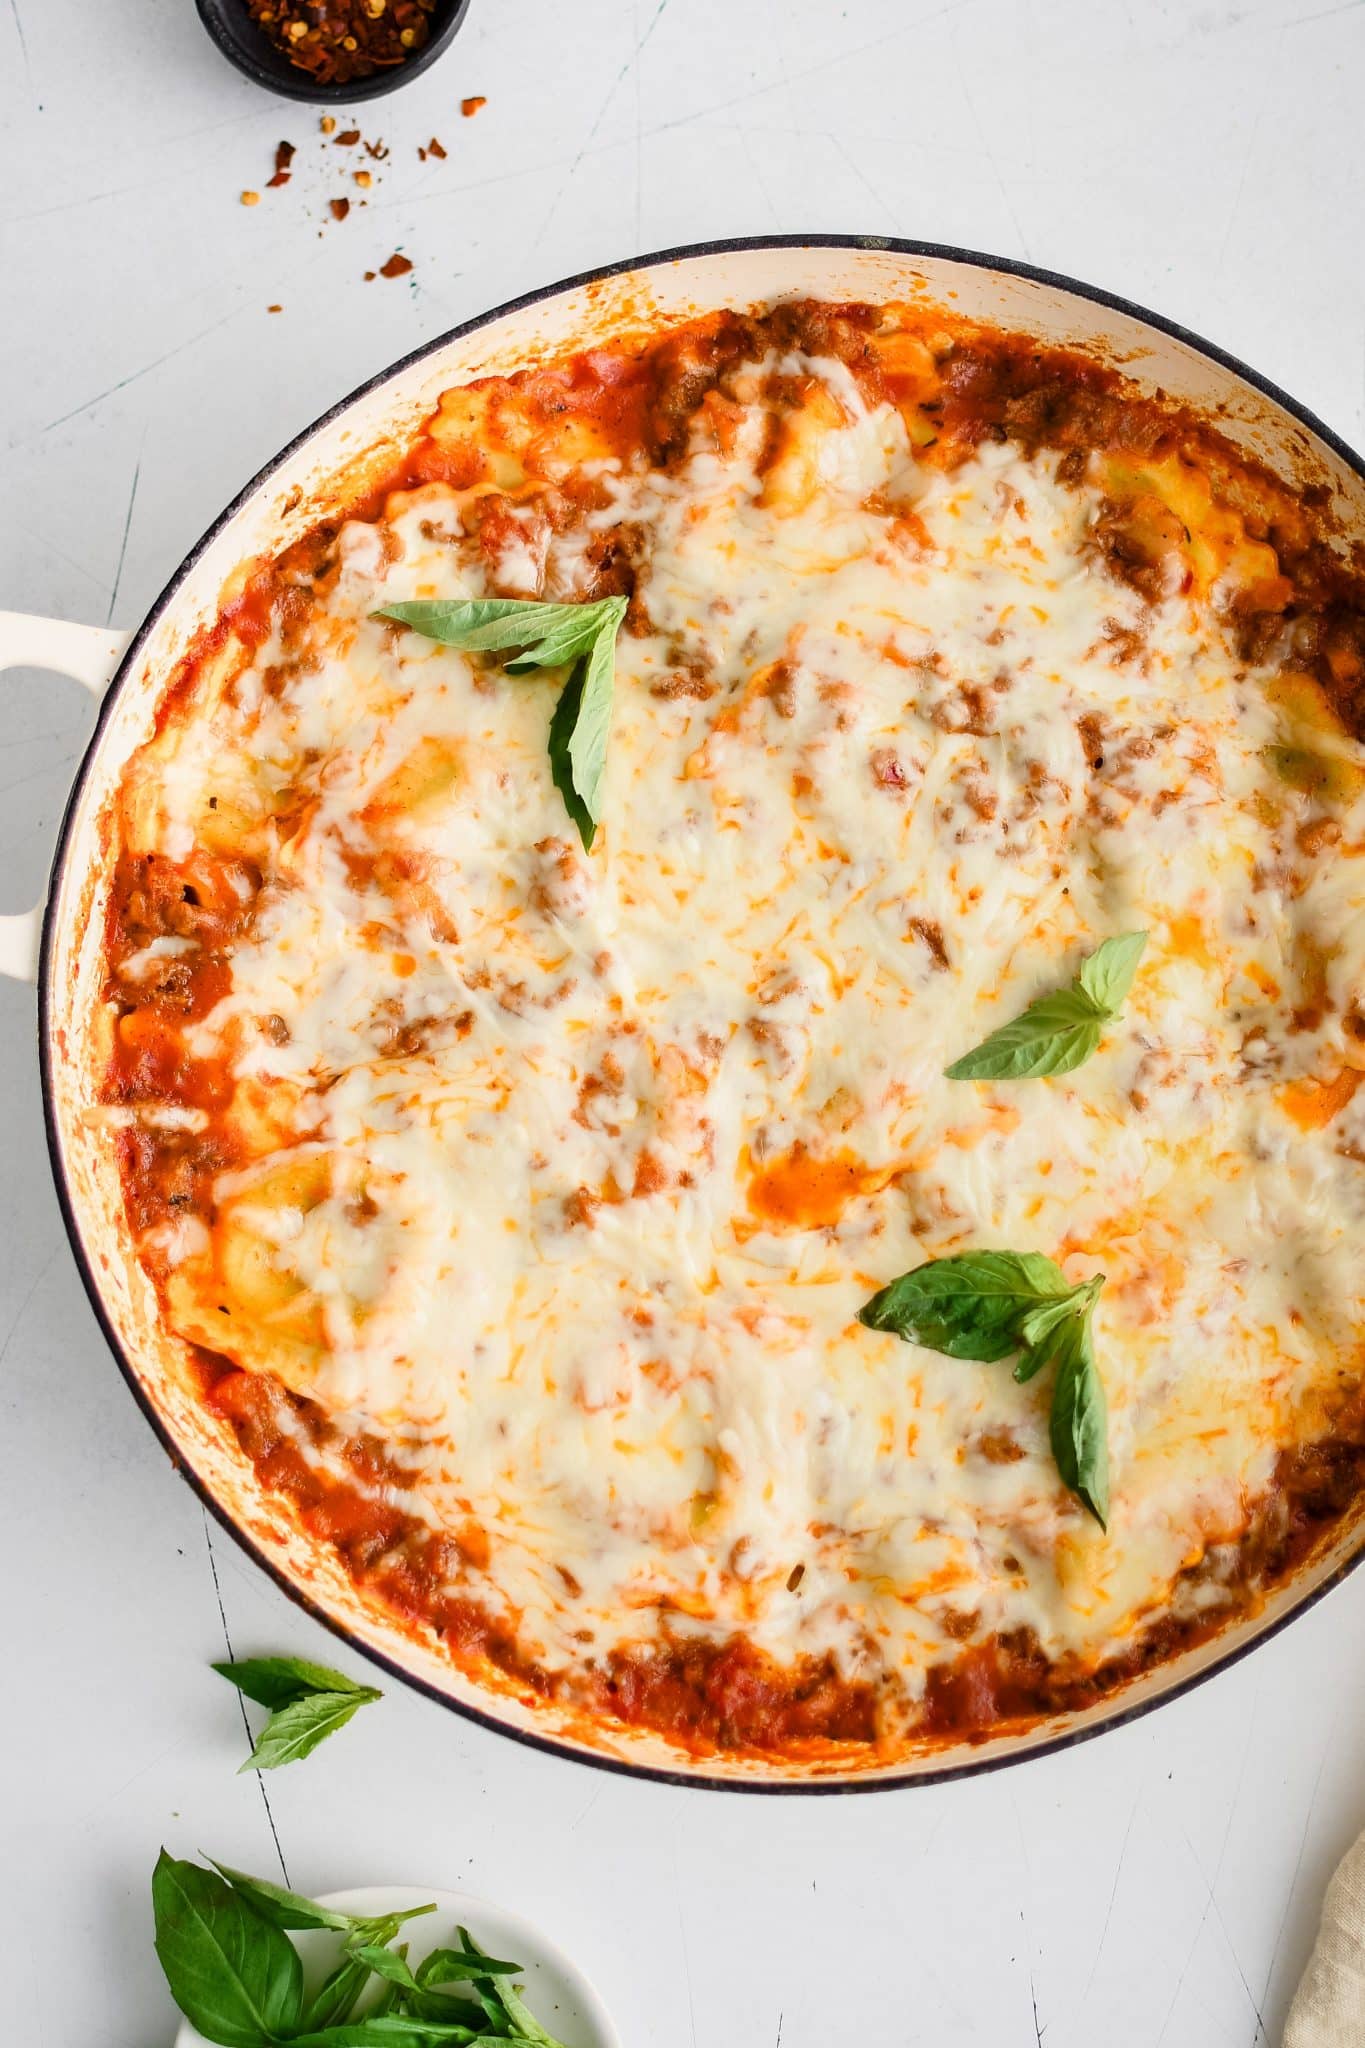 Gooey melted mozzarella cheese covering a large skillet filled with ravioli coated with meat-filled marinara sauce and garnished with fresh basil leaves.